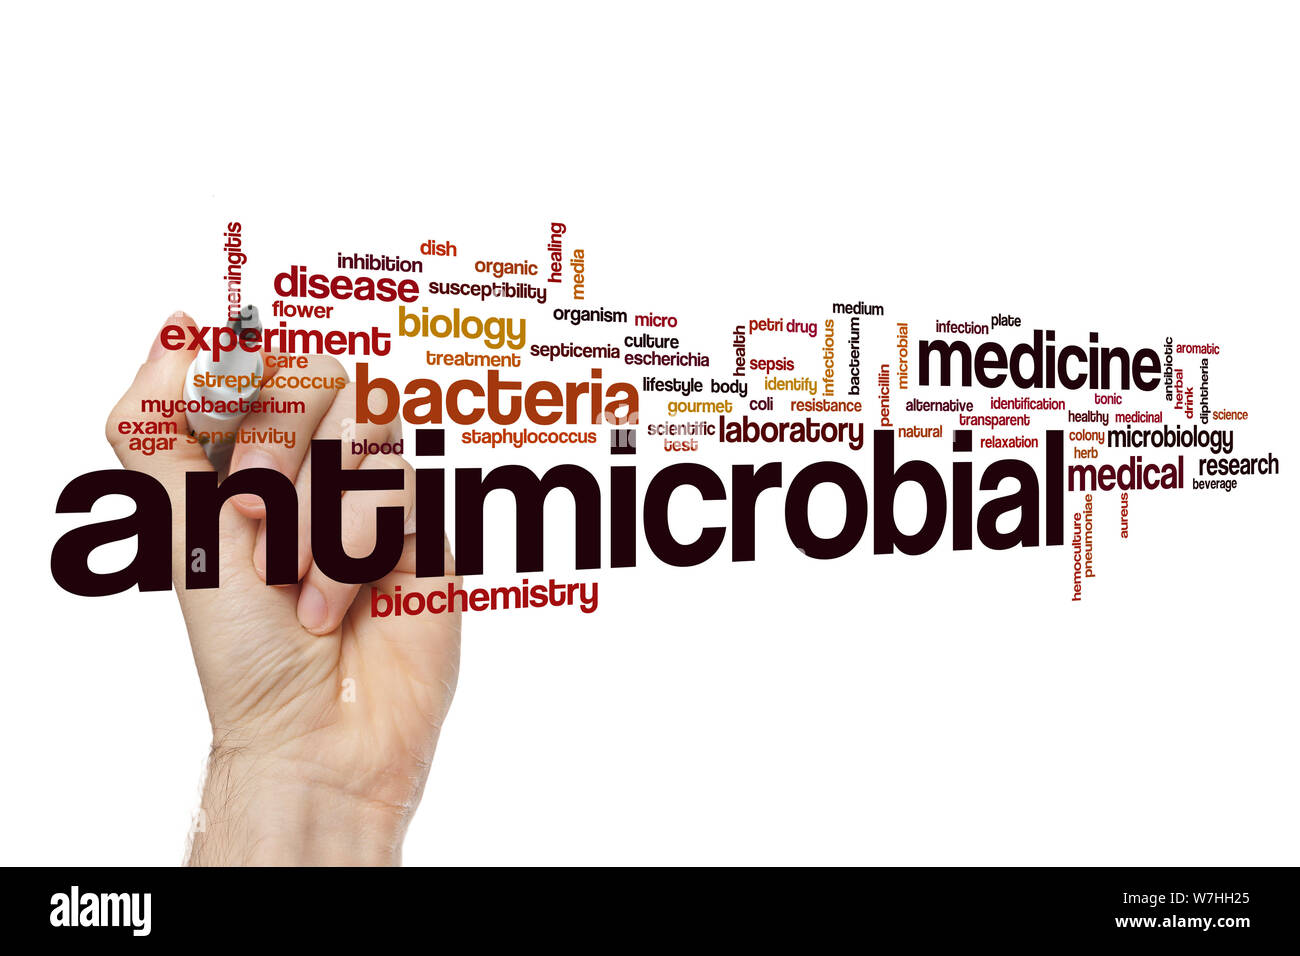 Antimicrobial word cloud concept Stock Photo